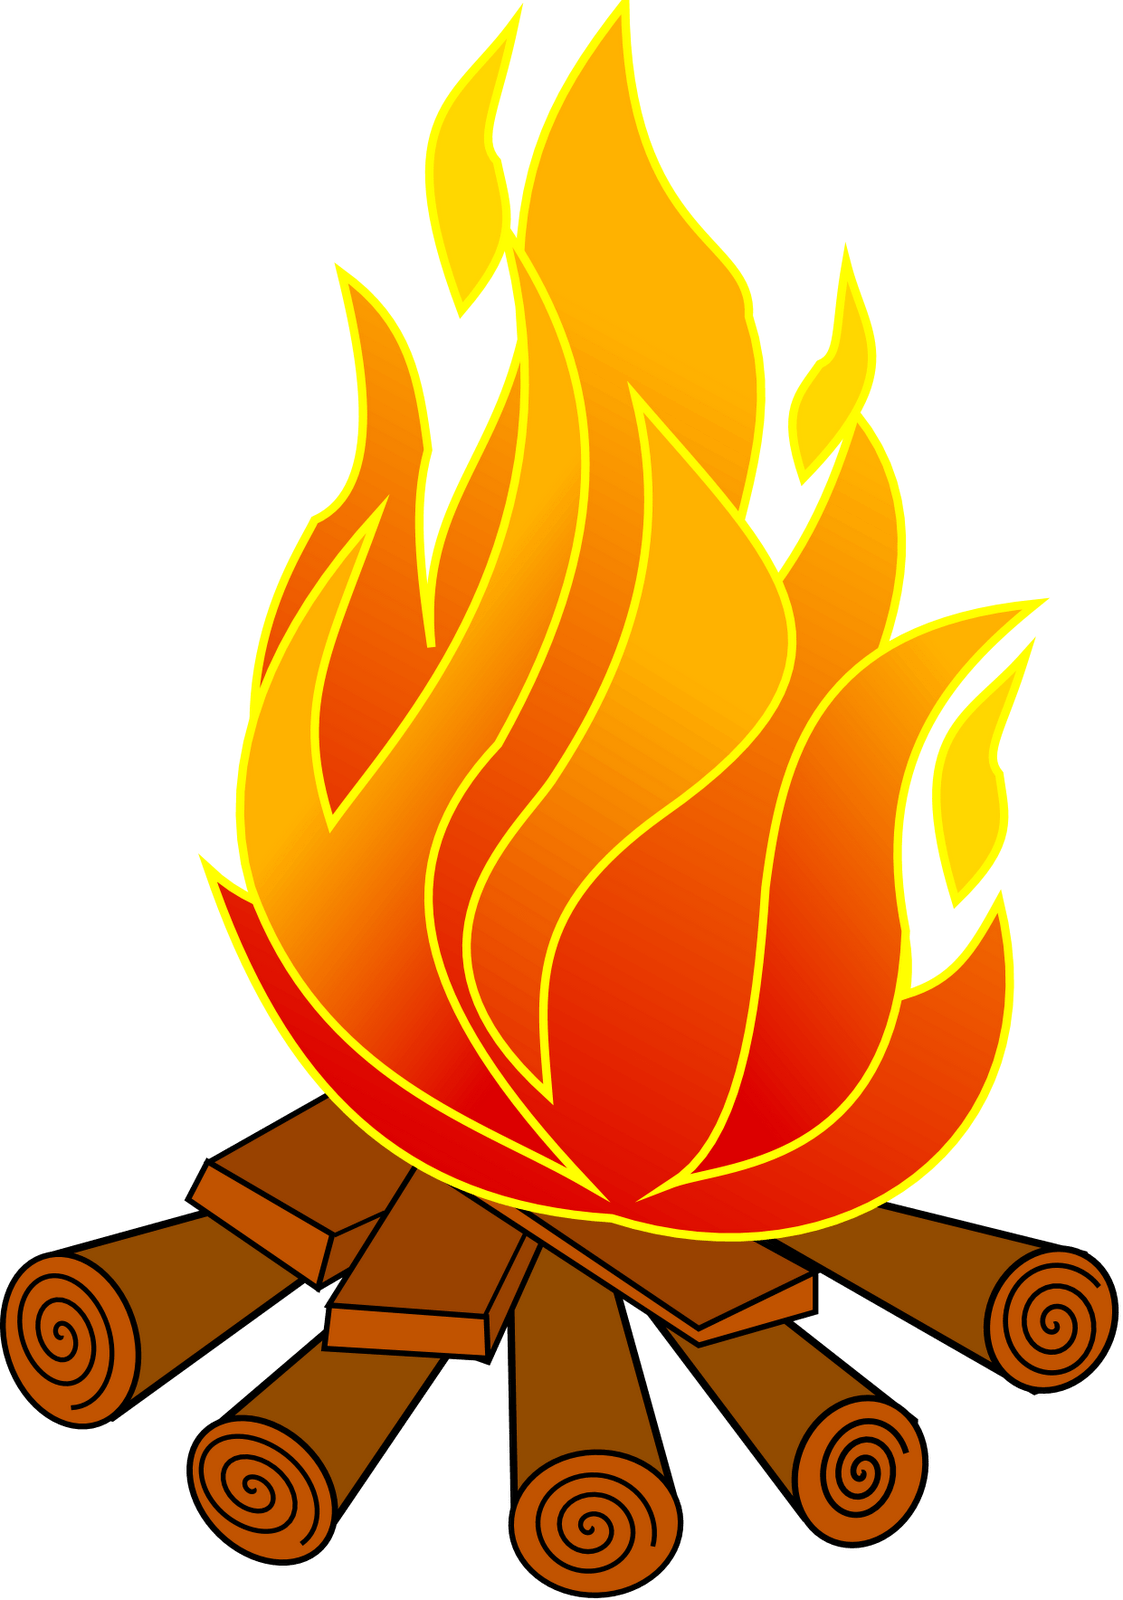 Flame clipart color. Fire torch interesting hand